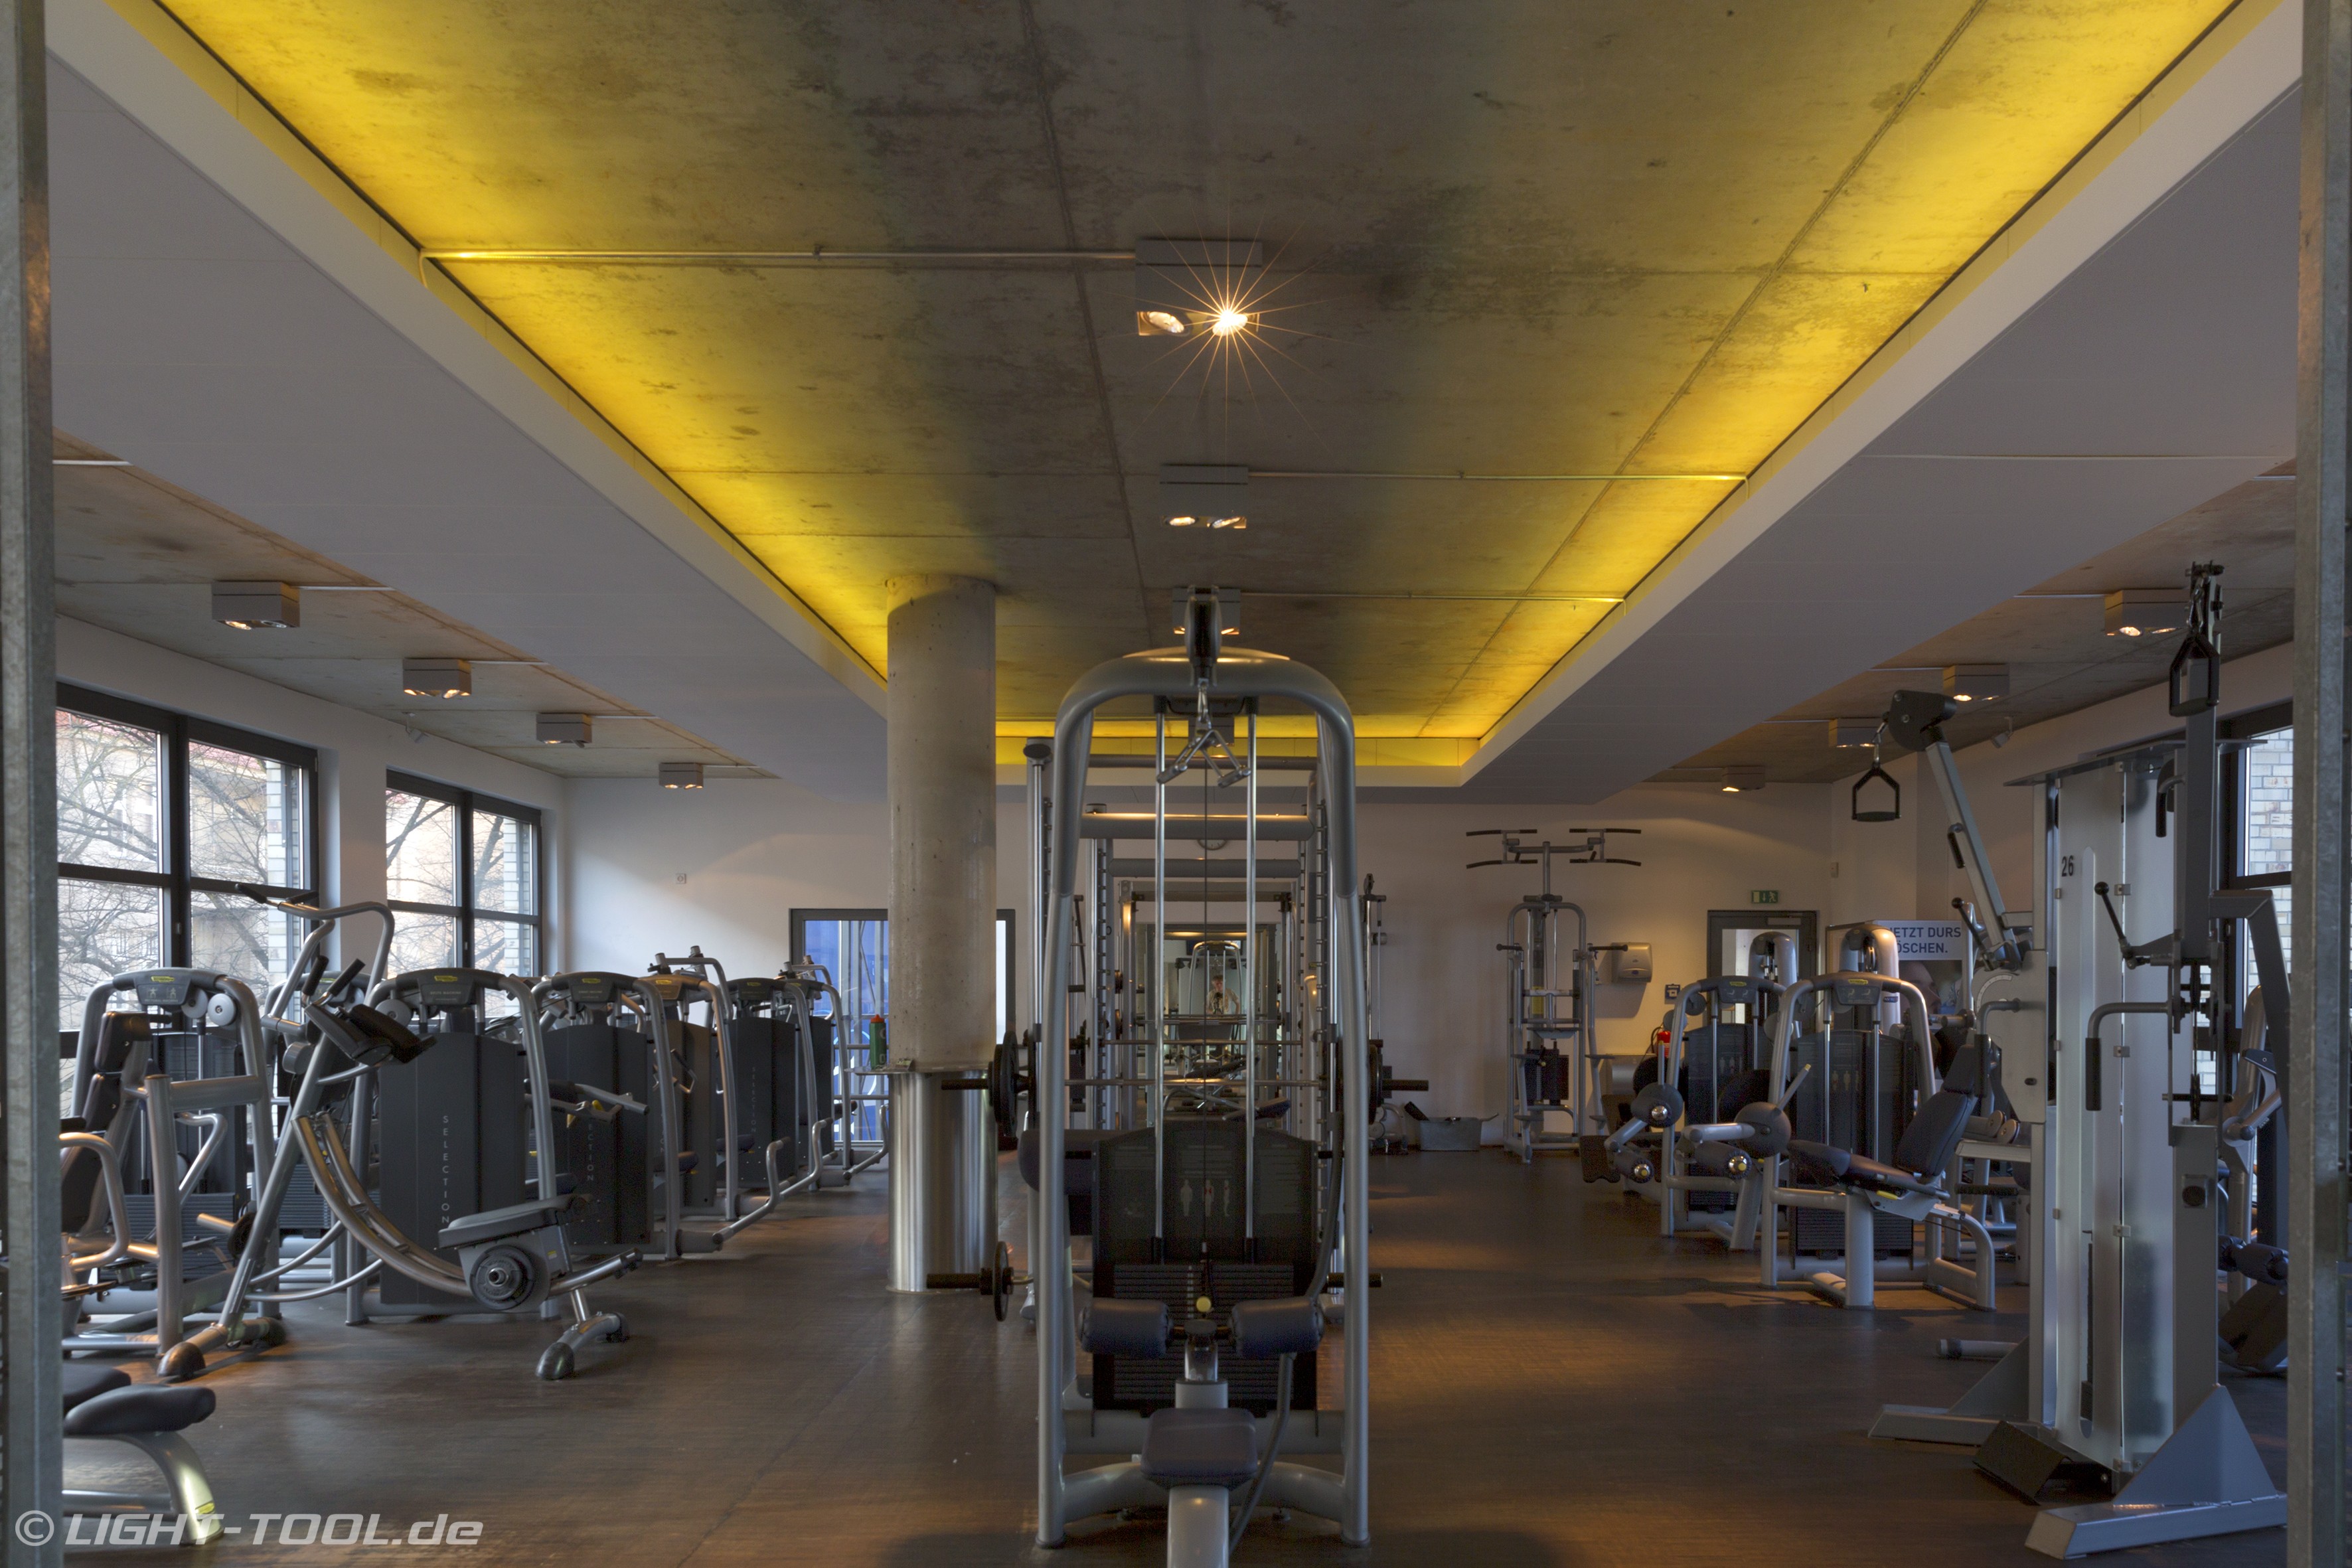 Led Rgb Installation Ambiente Vouten Beleuchtung Fitness